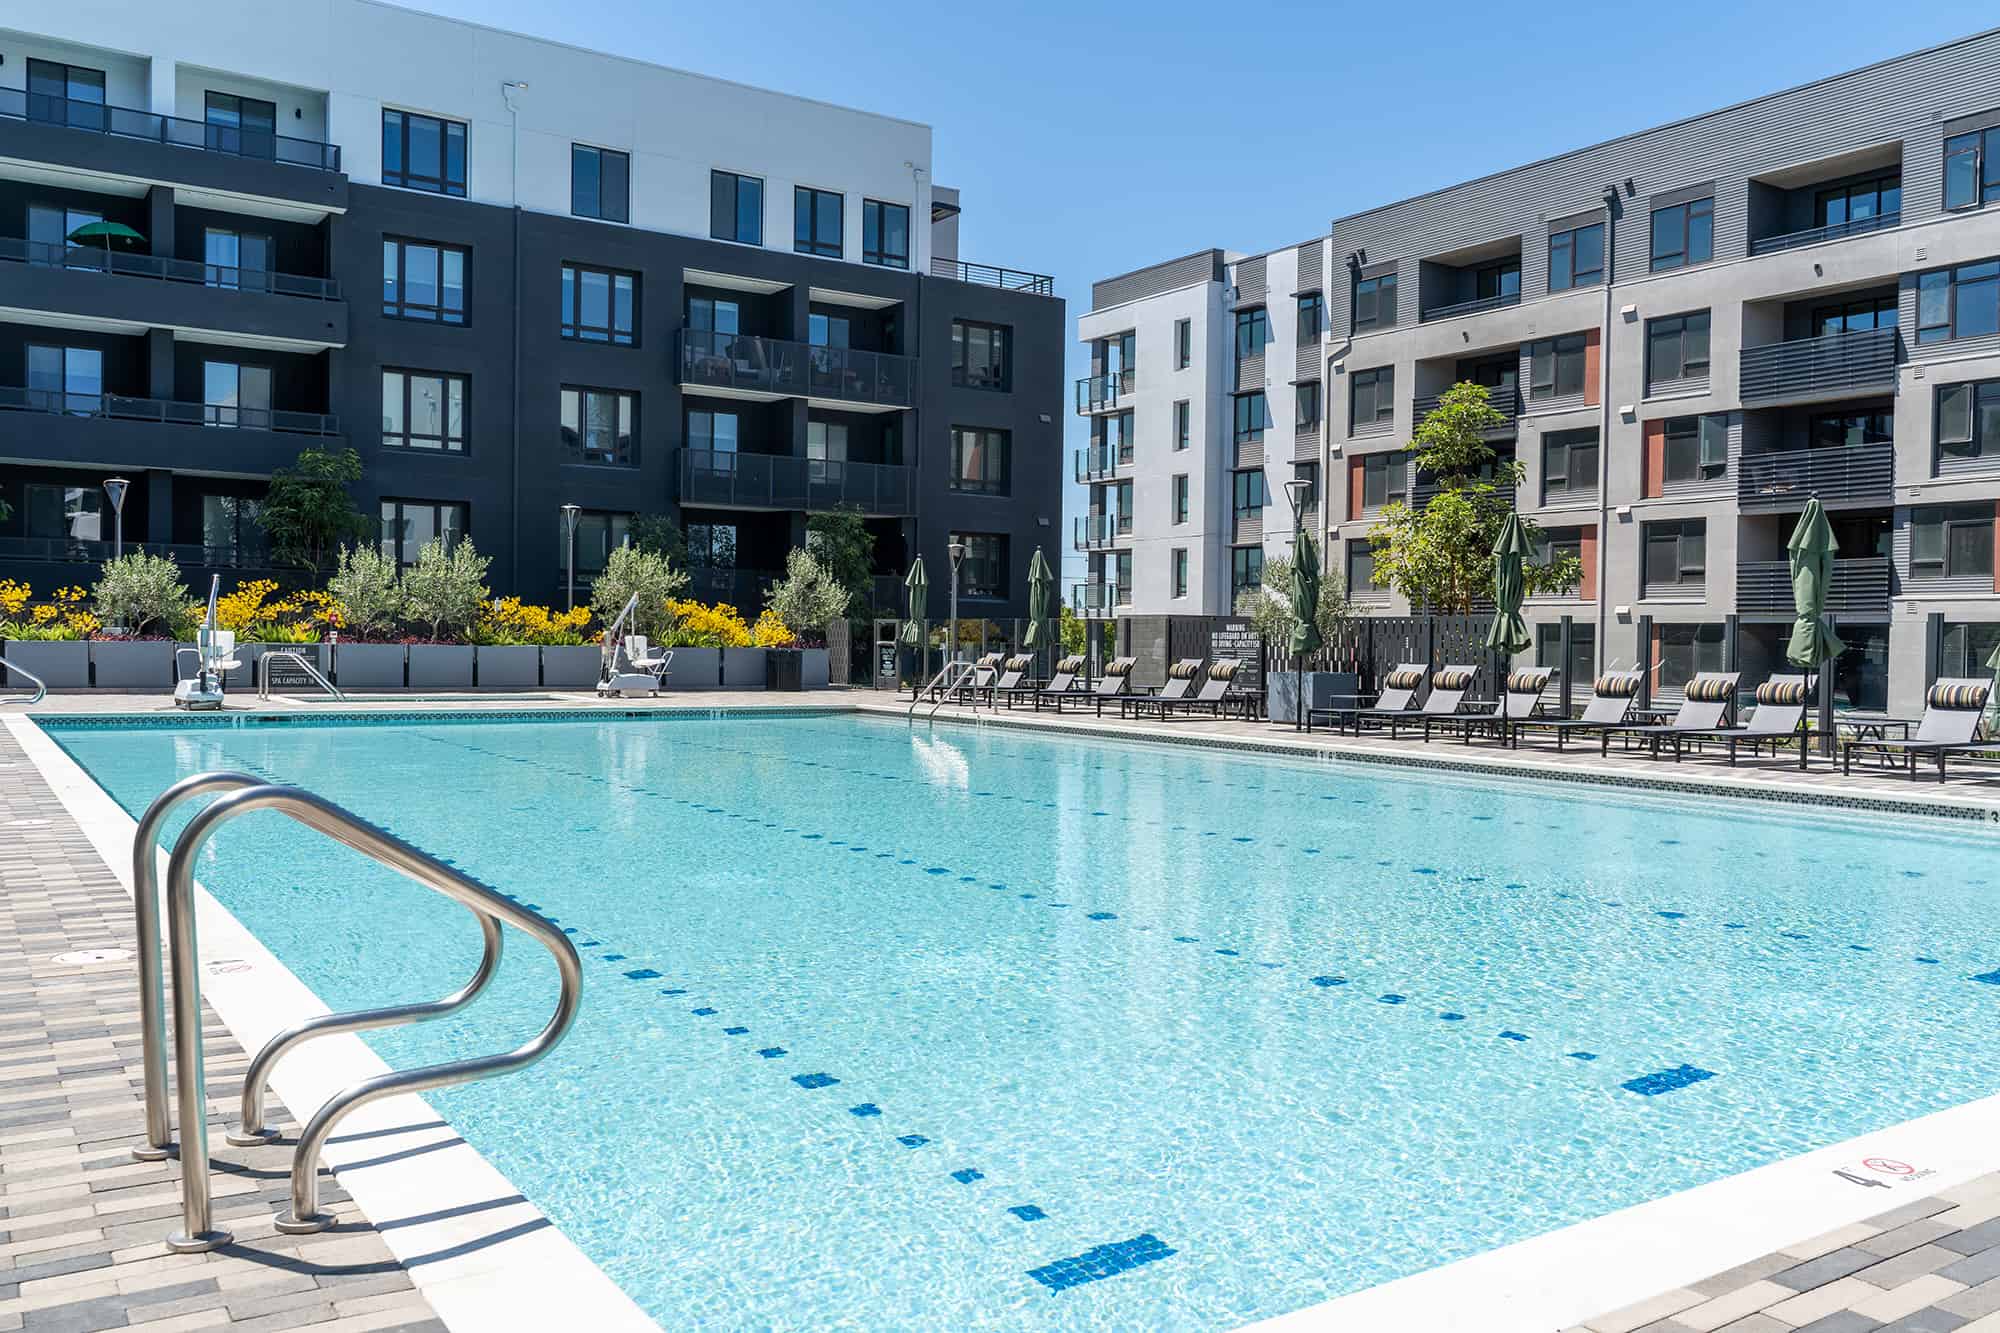 Apartments for Rent in Santa Clara CA - Prado-Sares-Regis - Sparkling Pool Surrounded by Lounge Seating